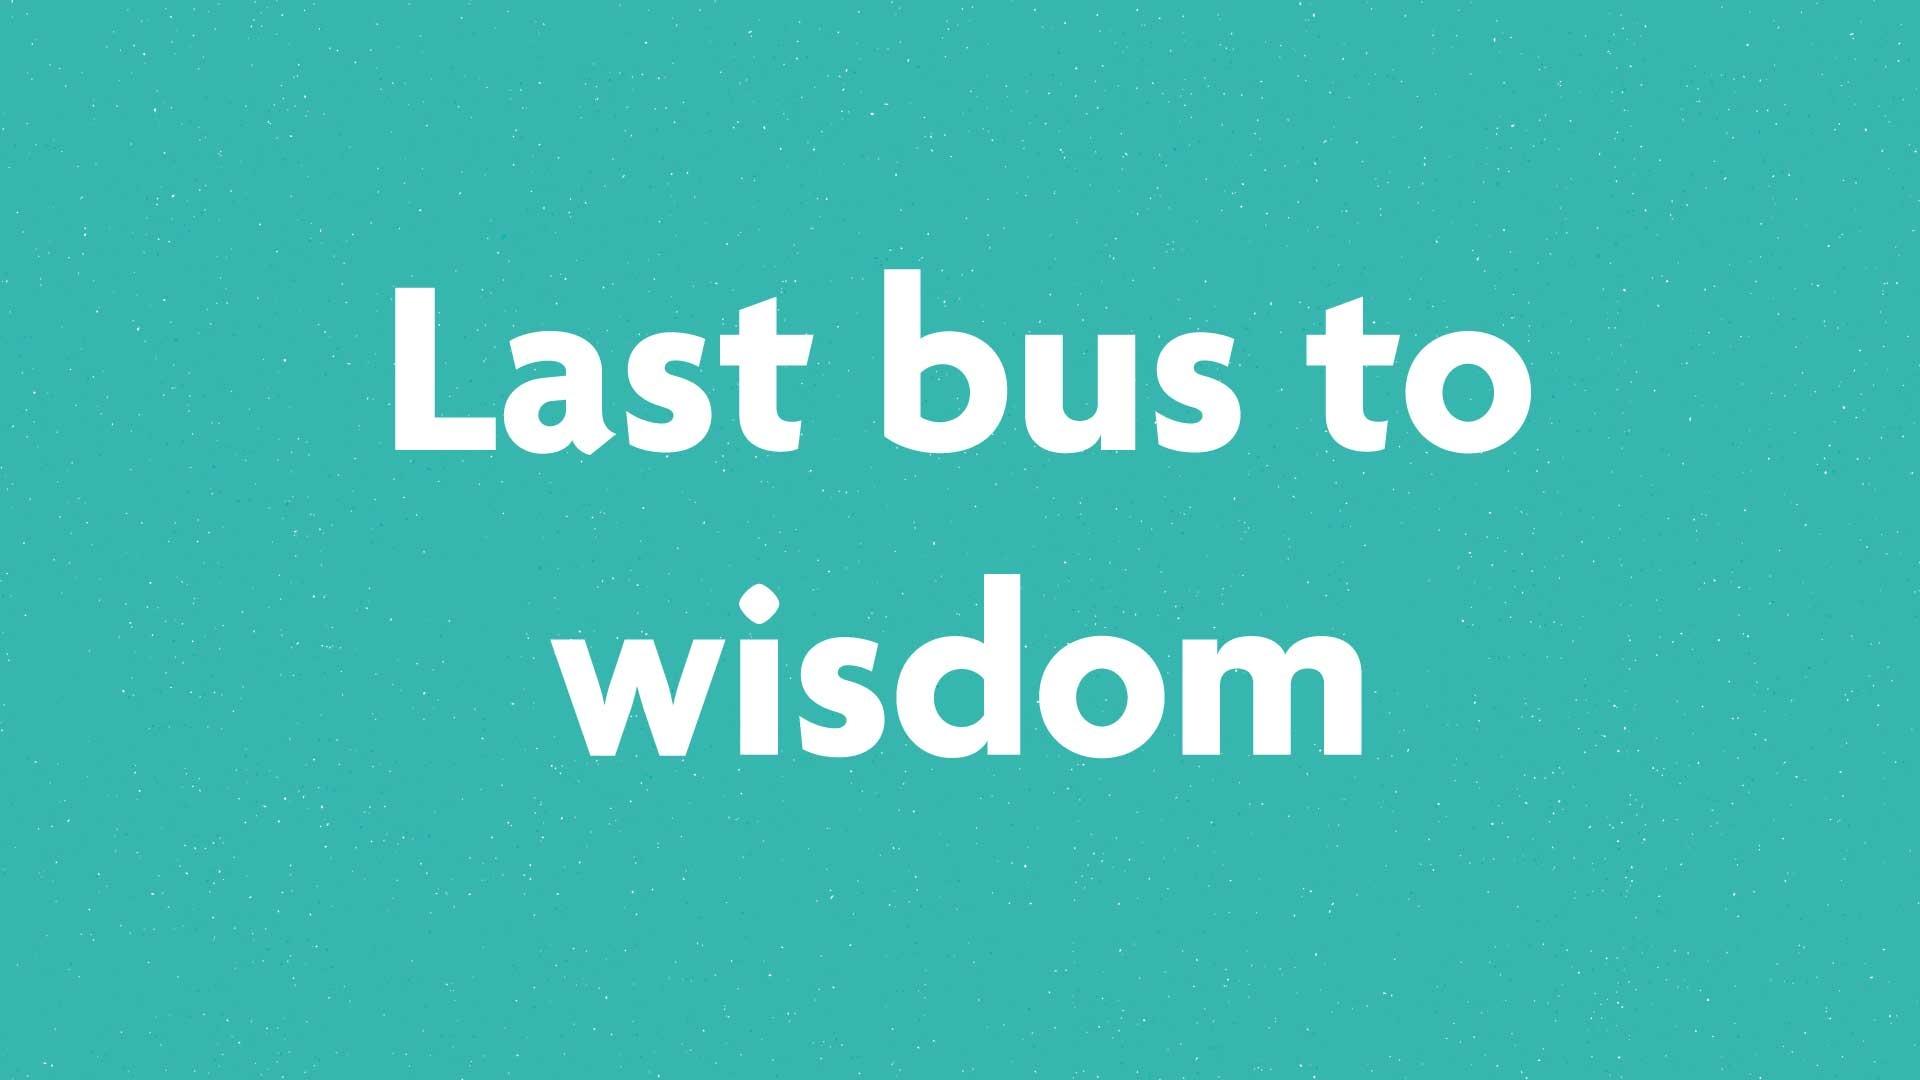 Last Bus to Wisdom book submission card on a green background.